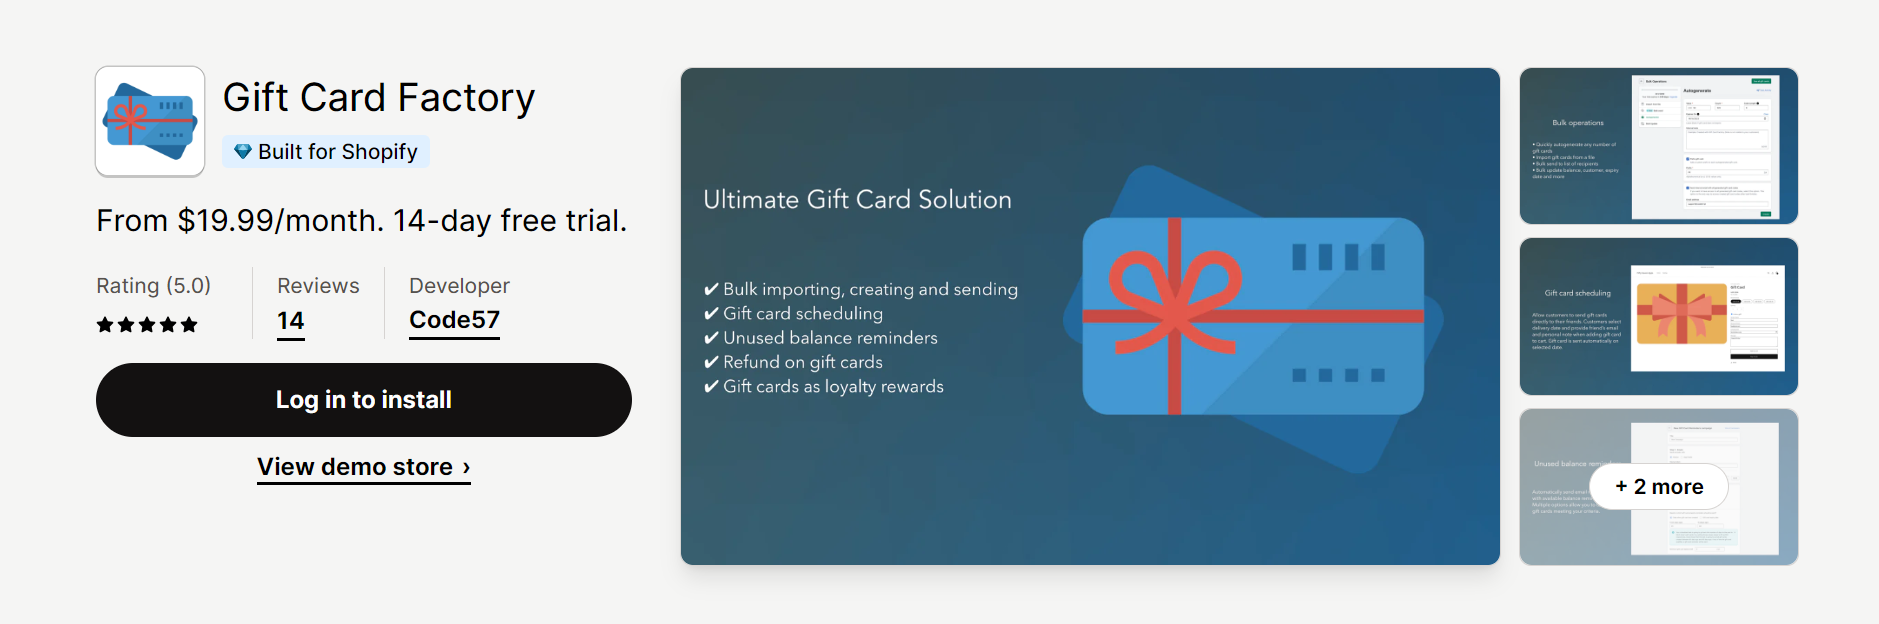 Gift Card Factory